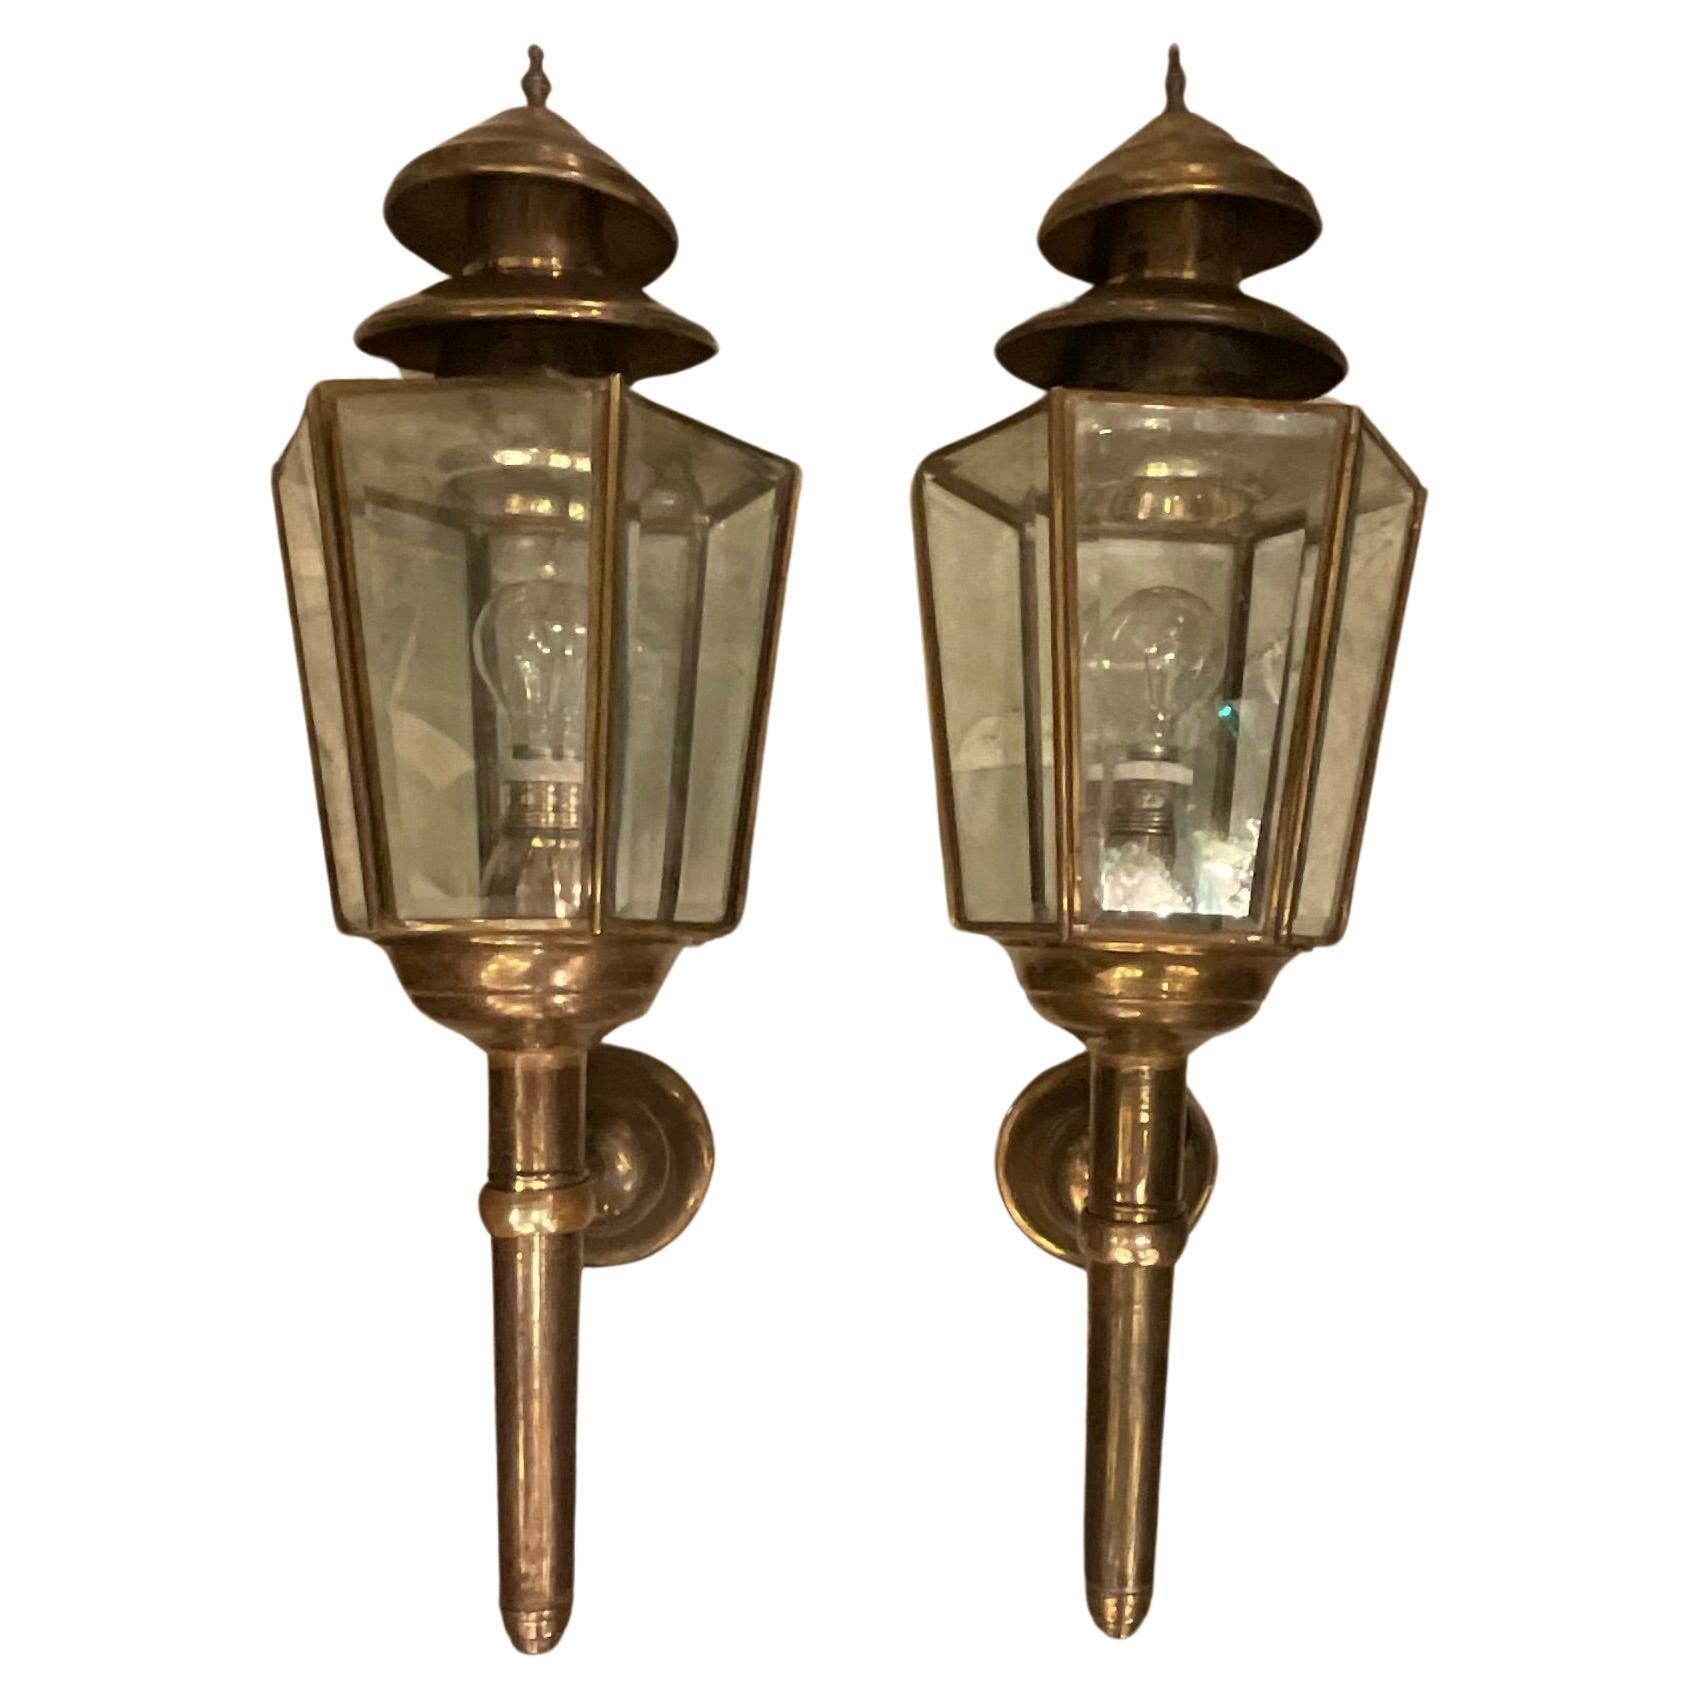 FONTANARTE - Peter Church - Great Couple  of wall sconces - 1950